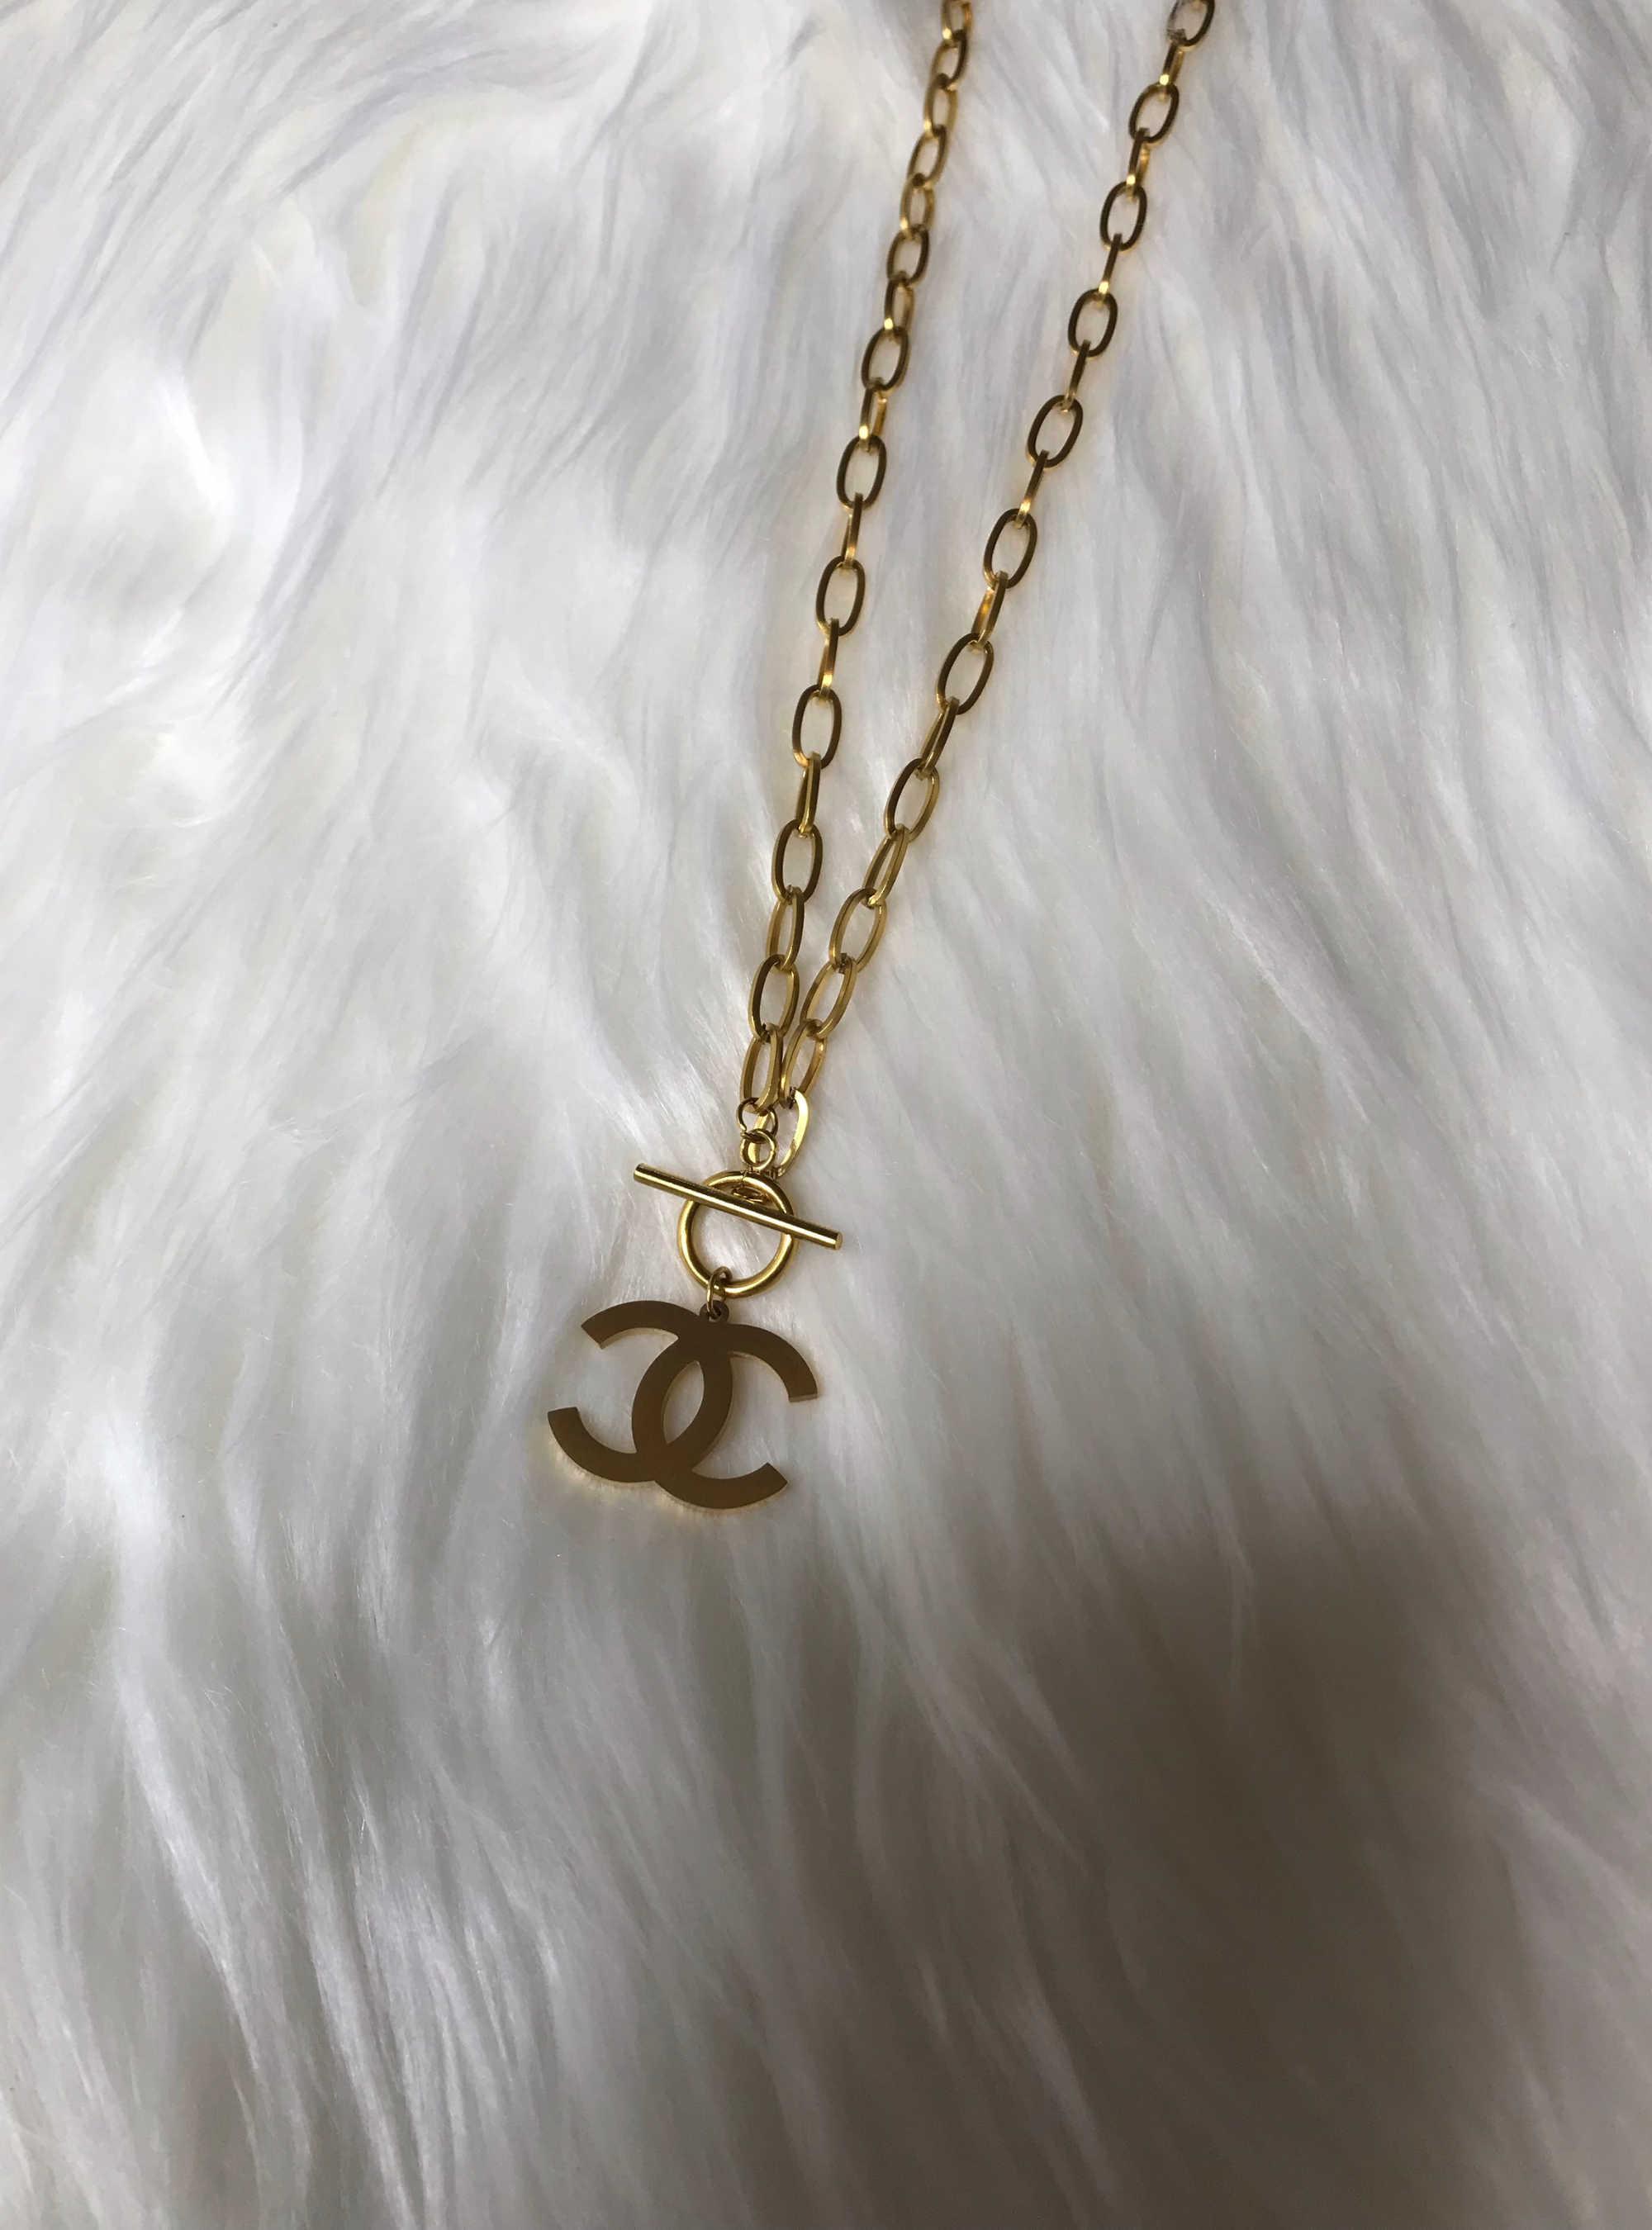 Chanel Charms 